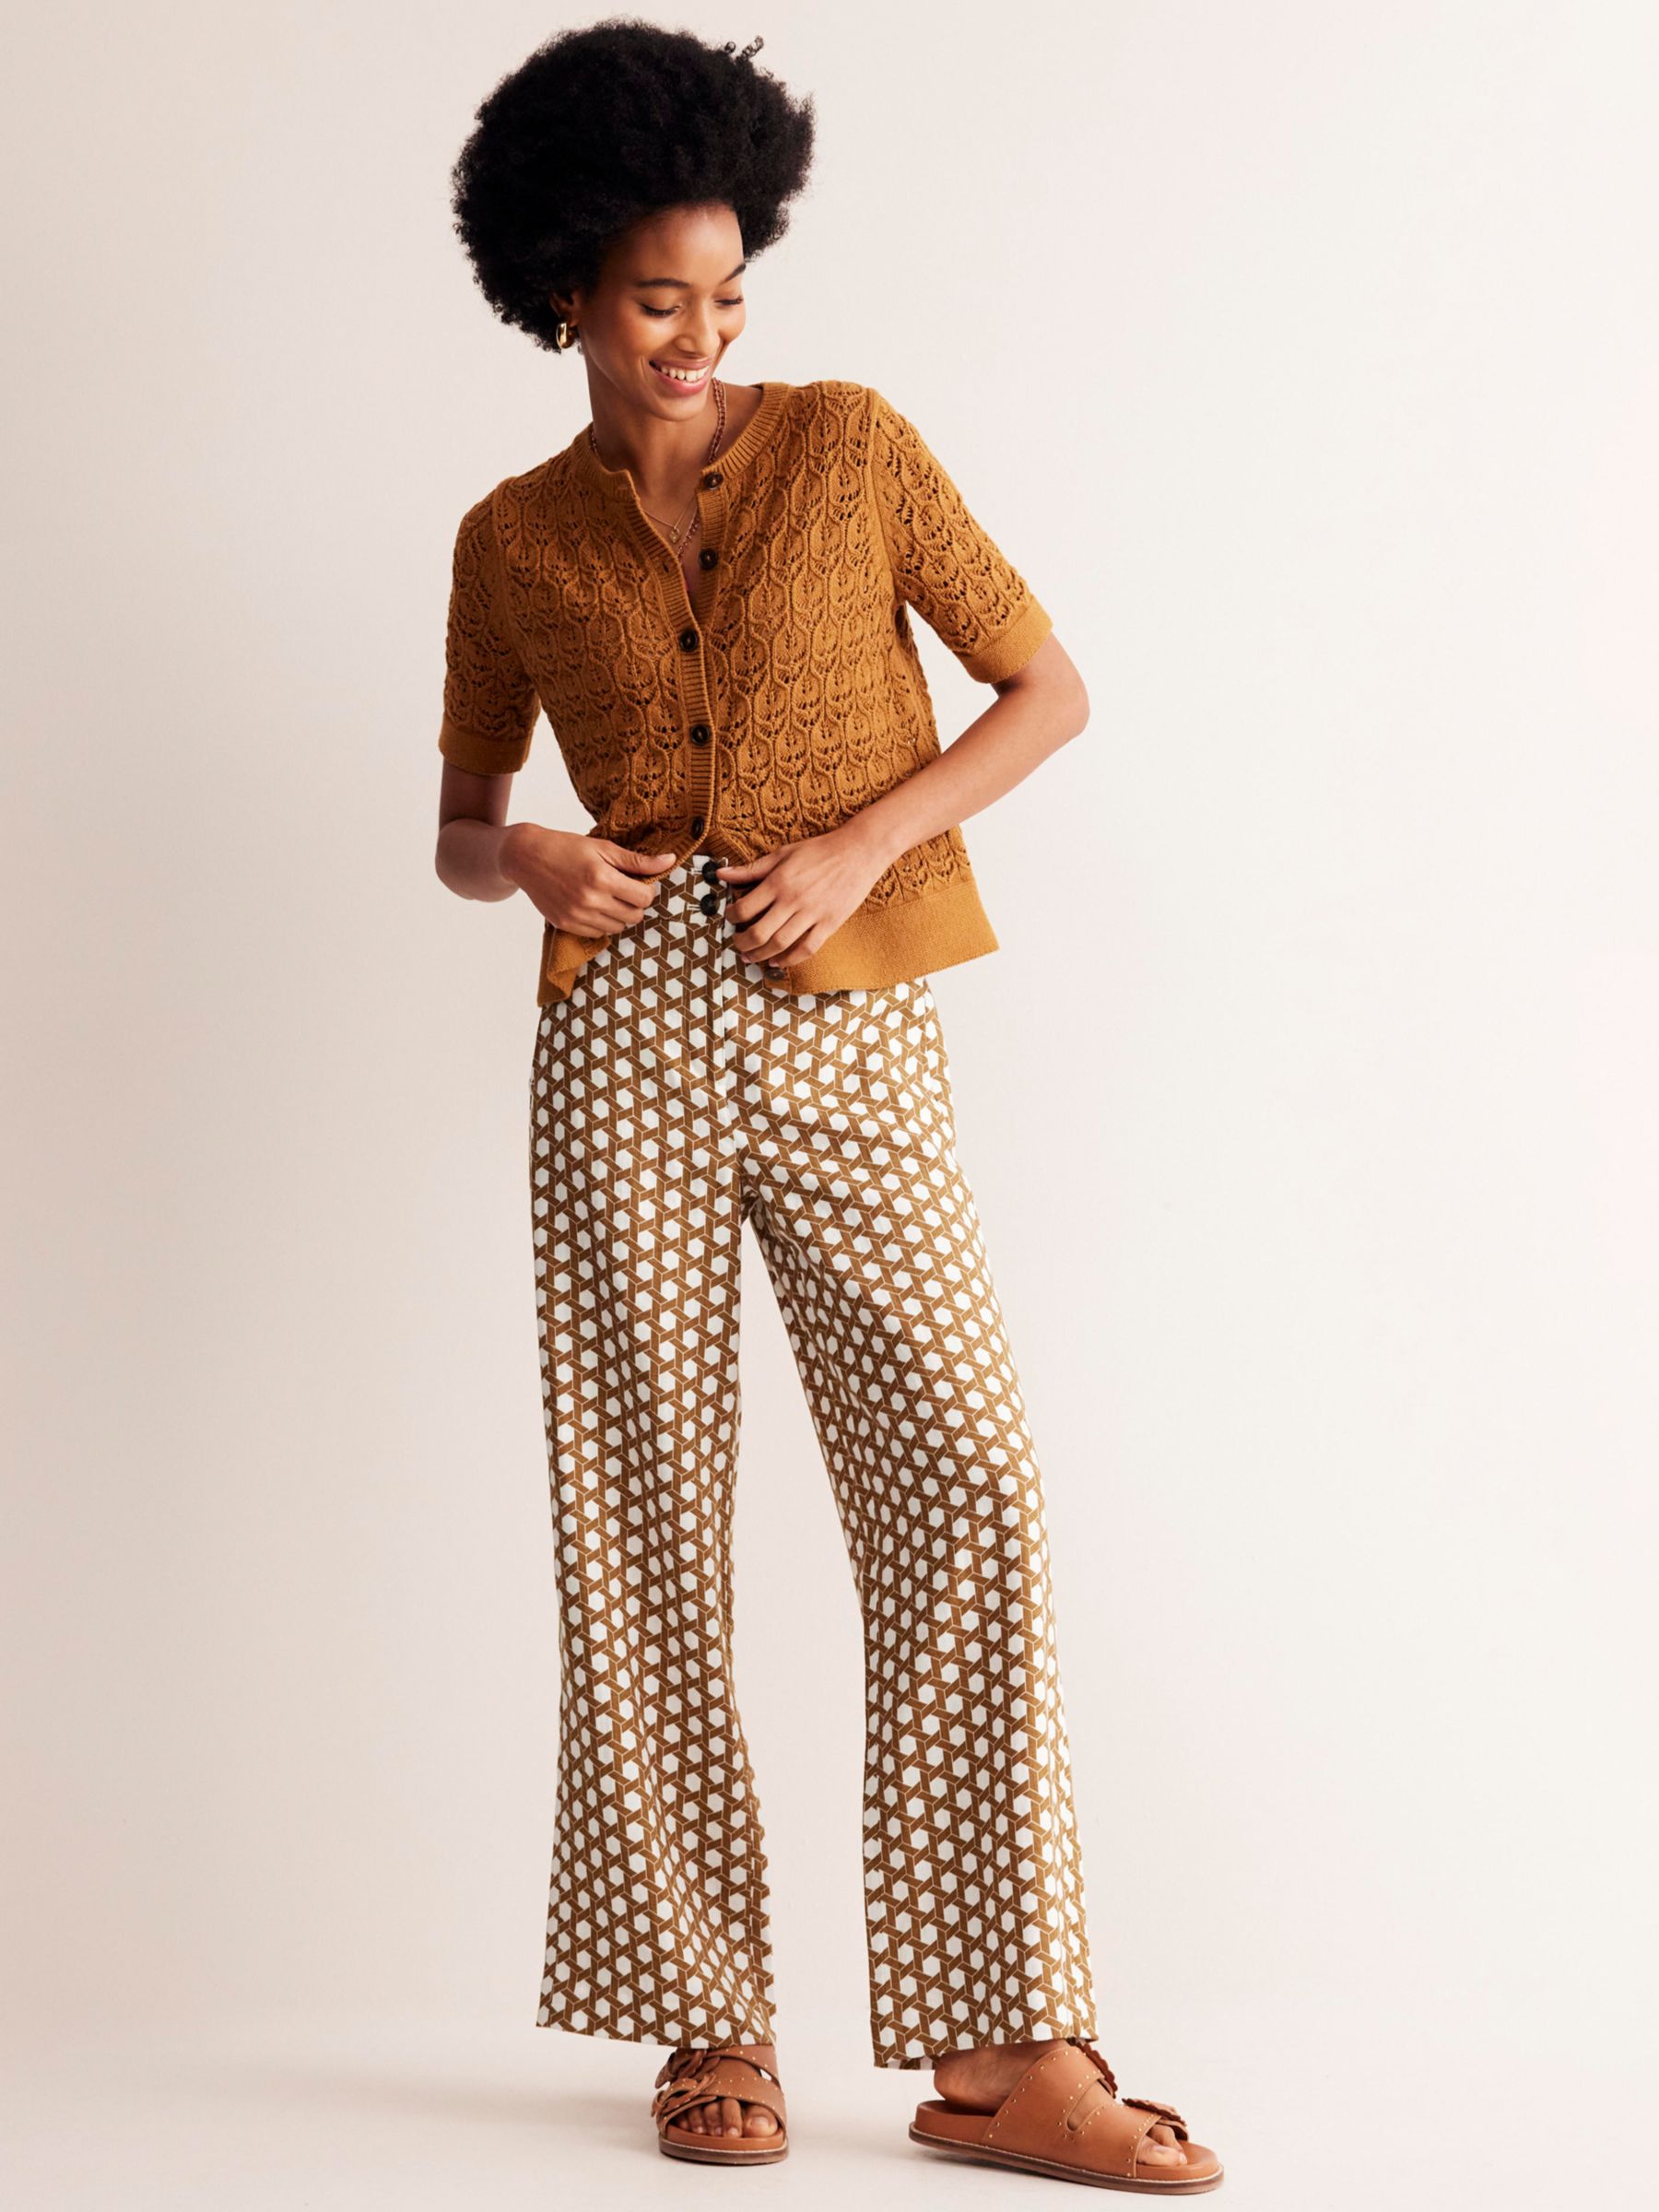 Boden Westbourne Geometric Honeycomb Print Linen Trousers, Brown/White, 8